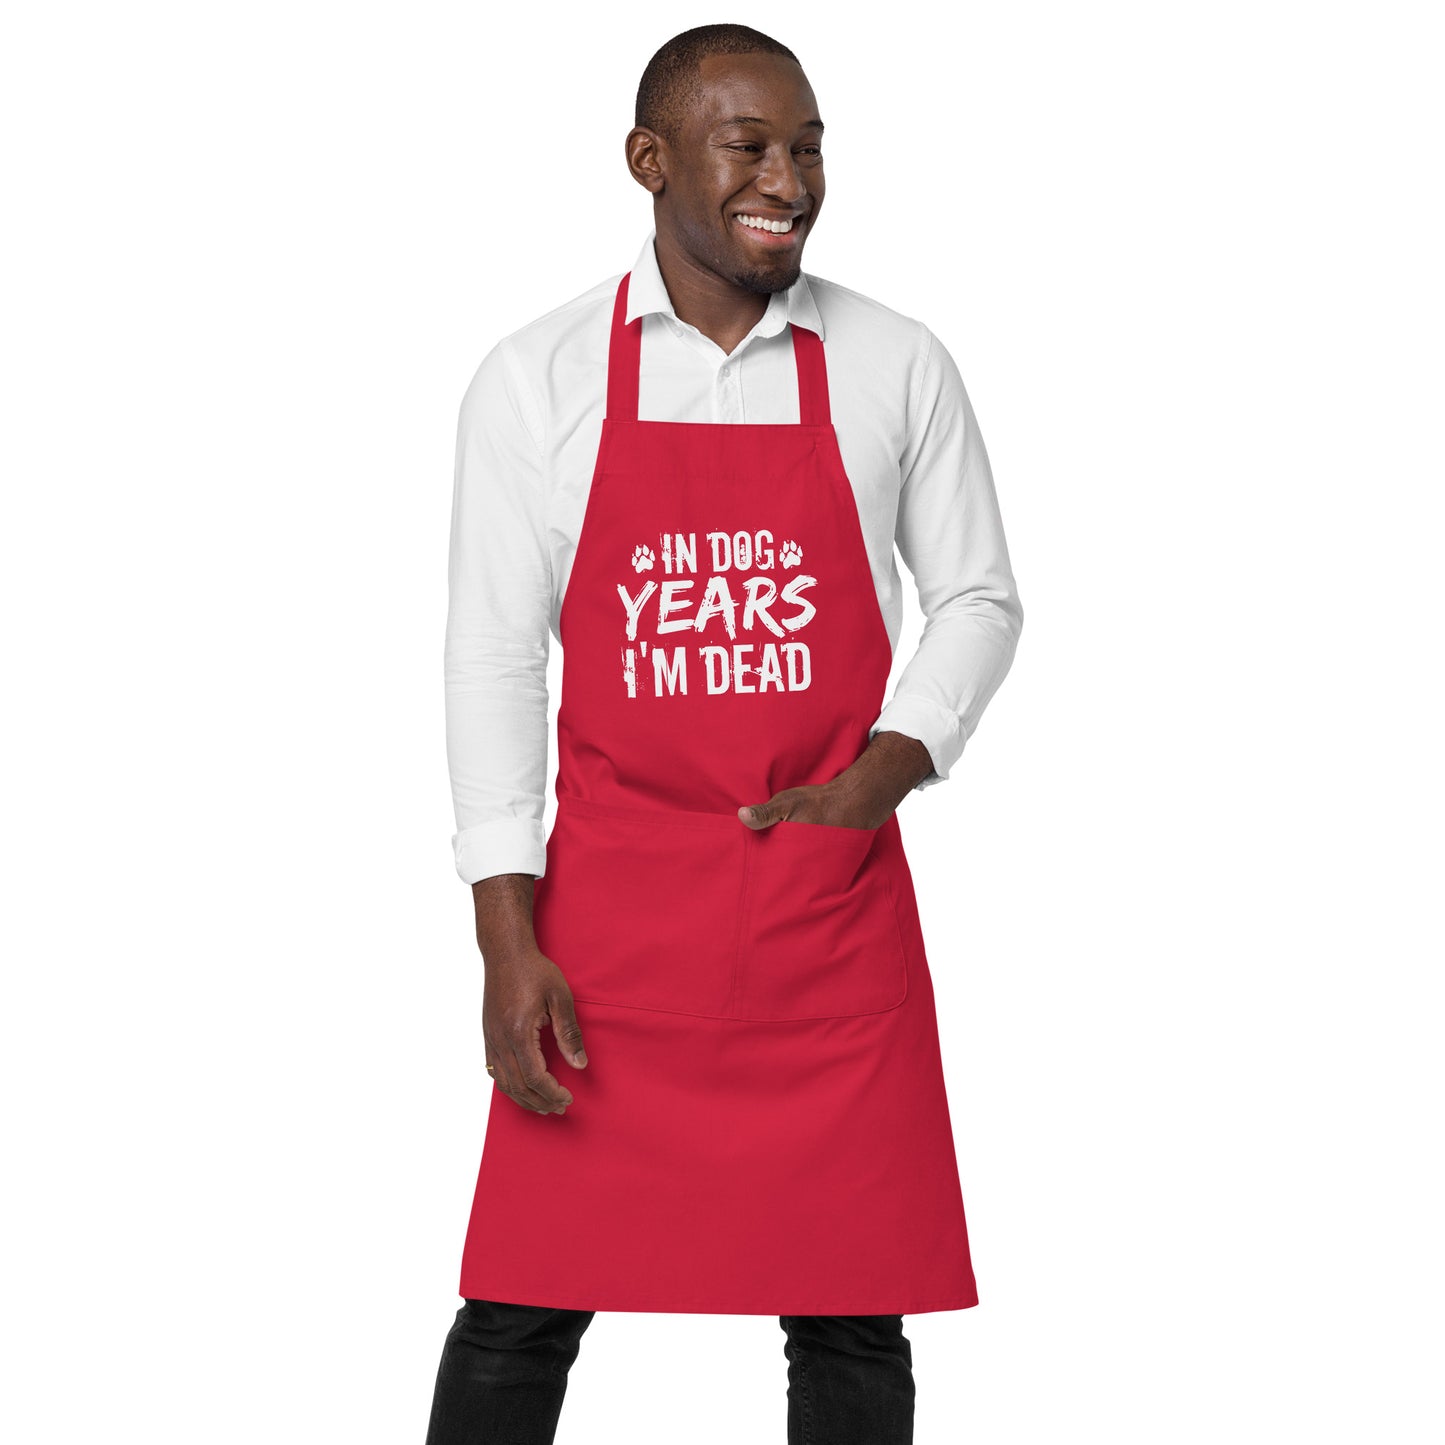 In Dog Years I'm Dead Organic cotton apron